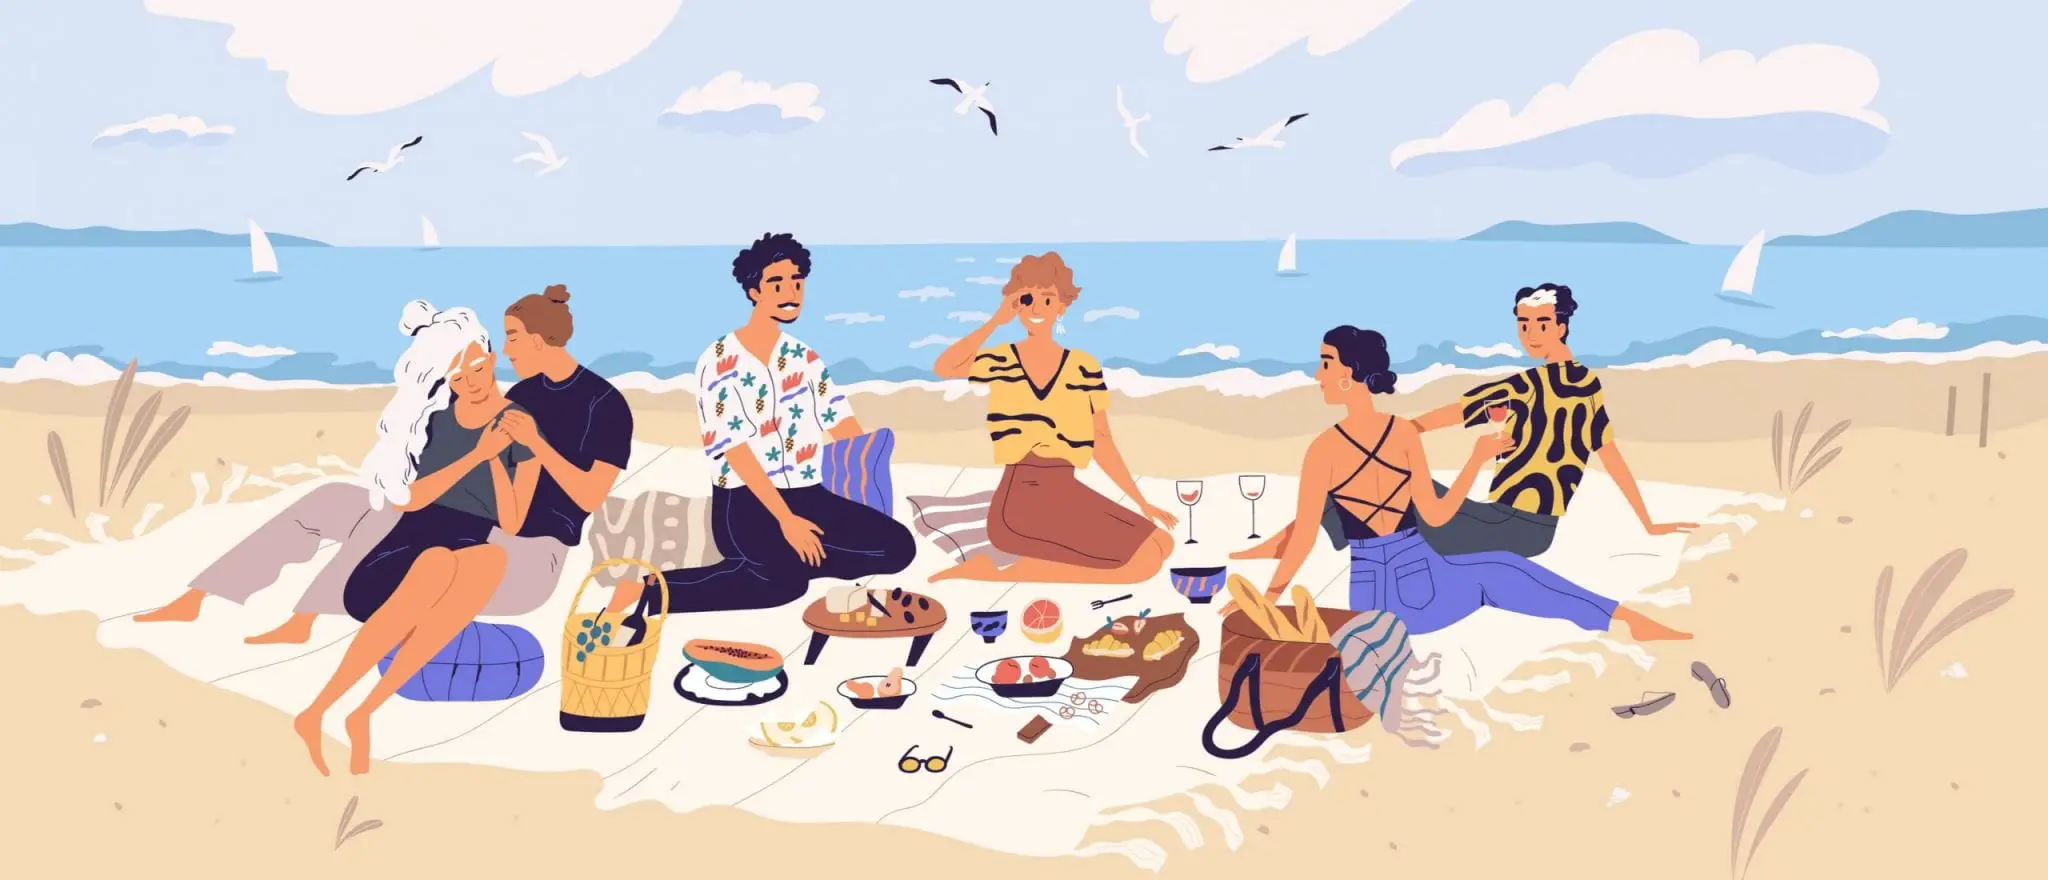 Group of Happy Friends at Picnic on Seashore. Young Smiling Men and Women Eating Food on Sandy Beach. Cute Funny People Having Lunch Together on Sea Shore.